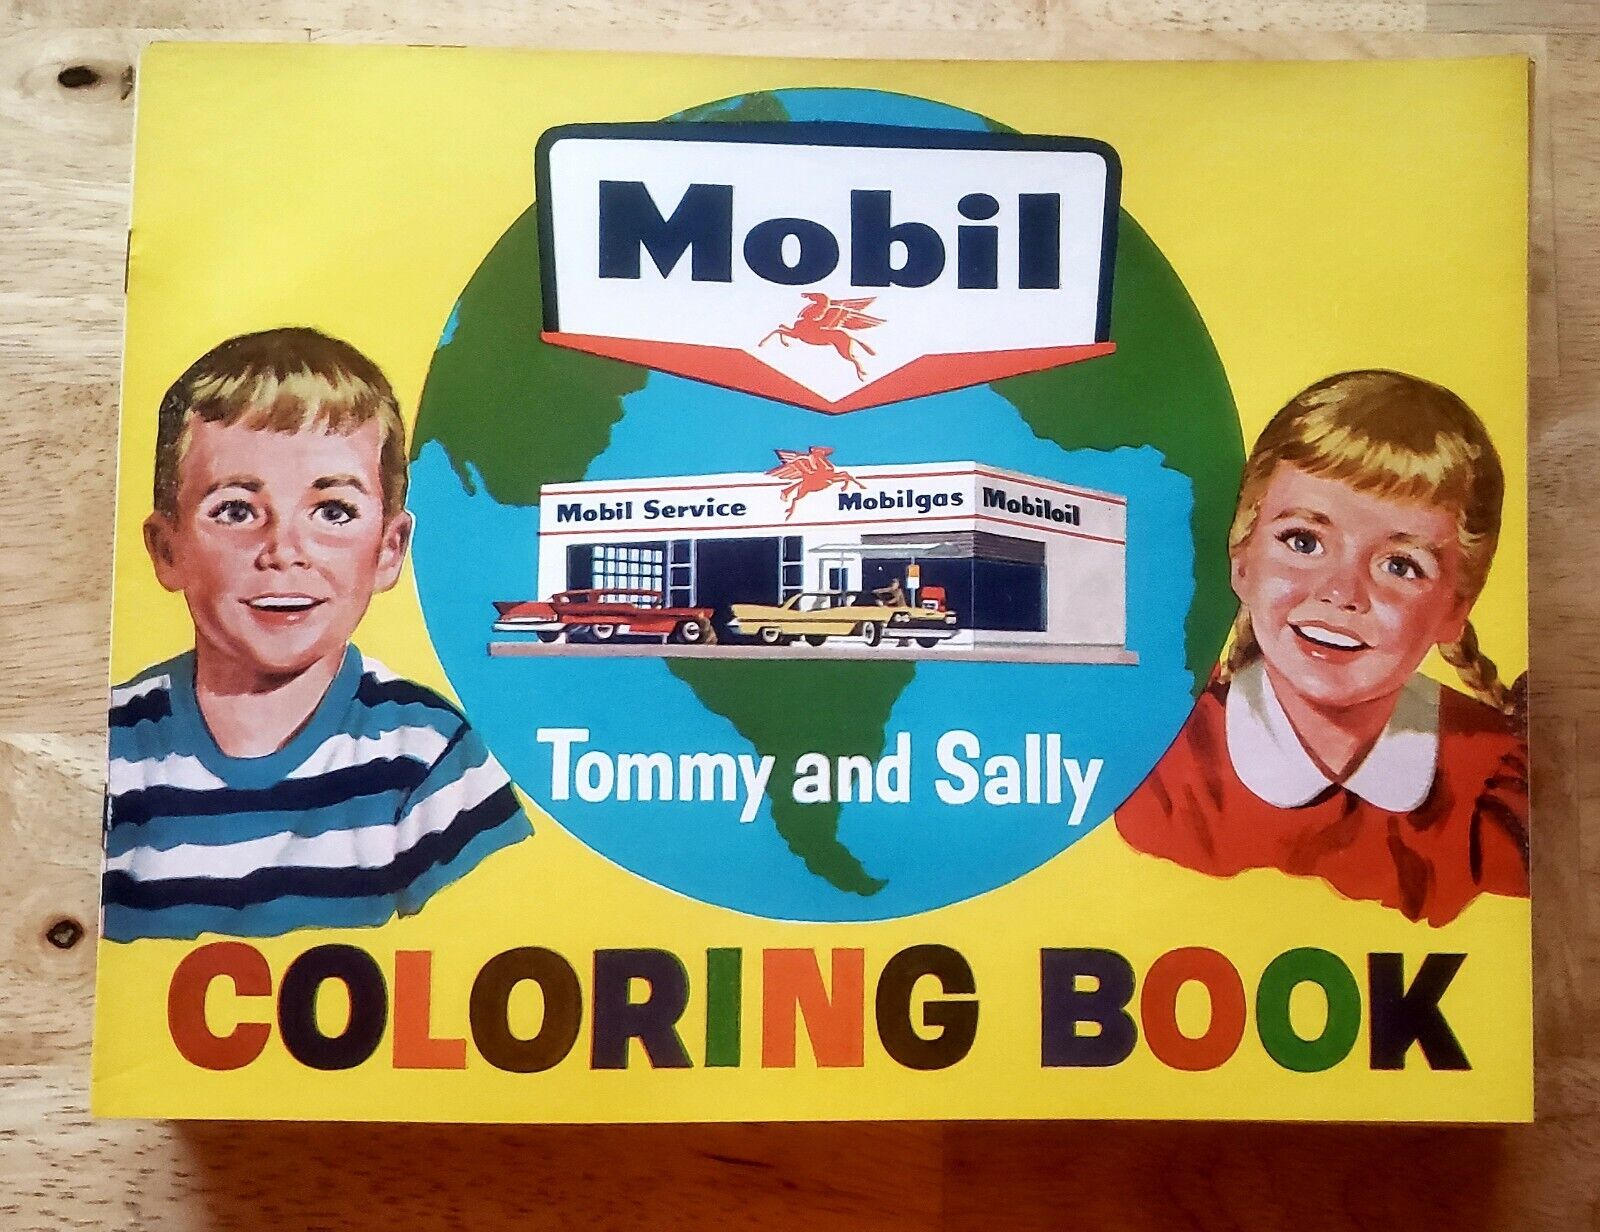 1950s Mobil Gas Station Coloring Book